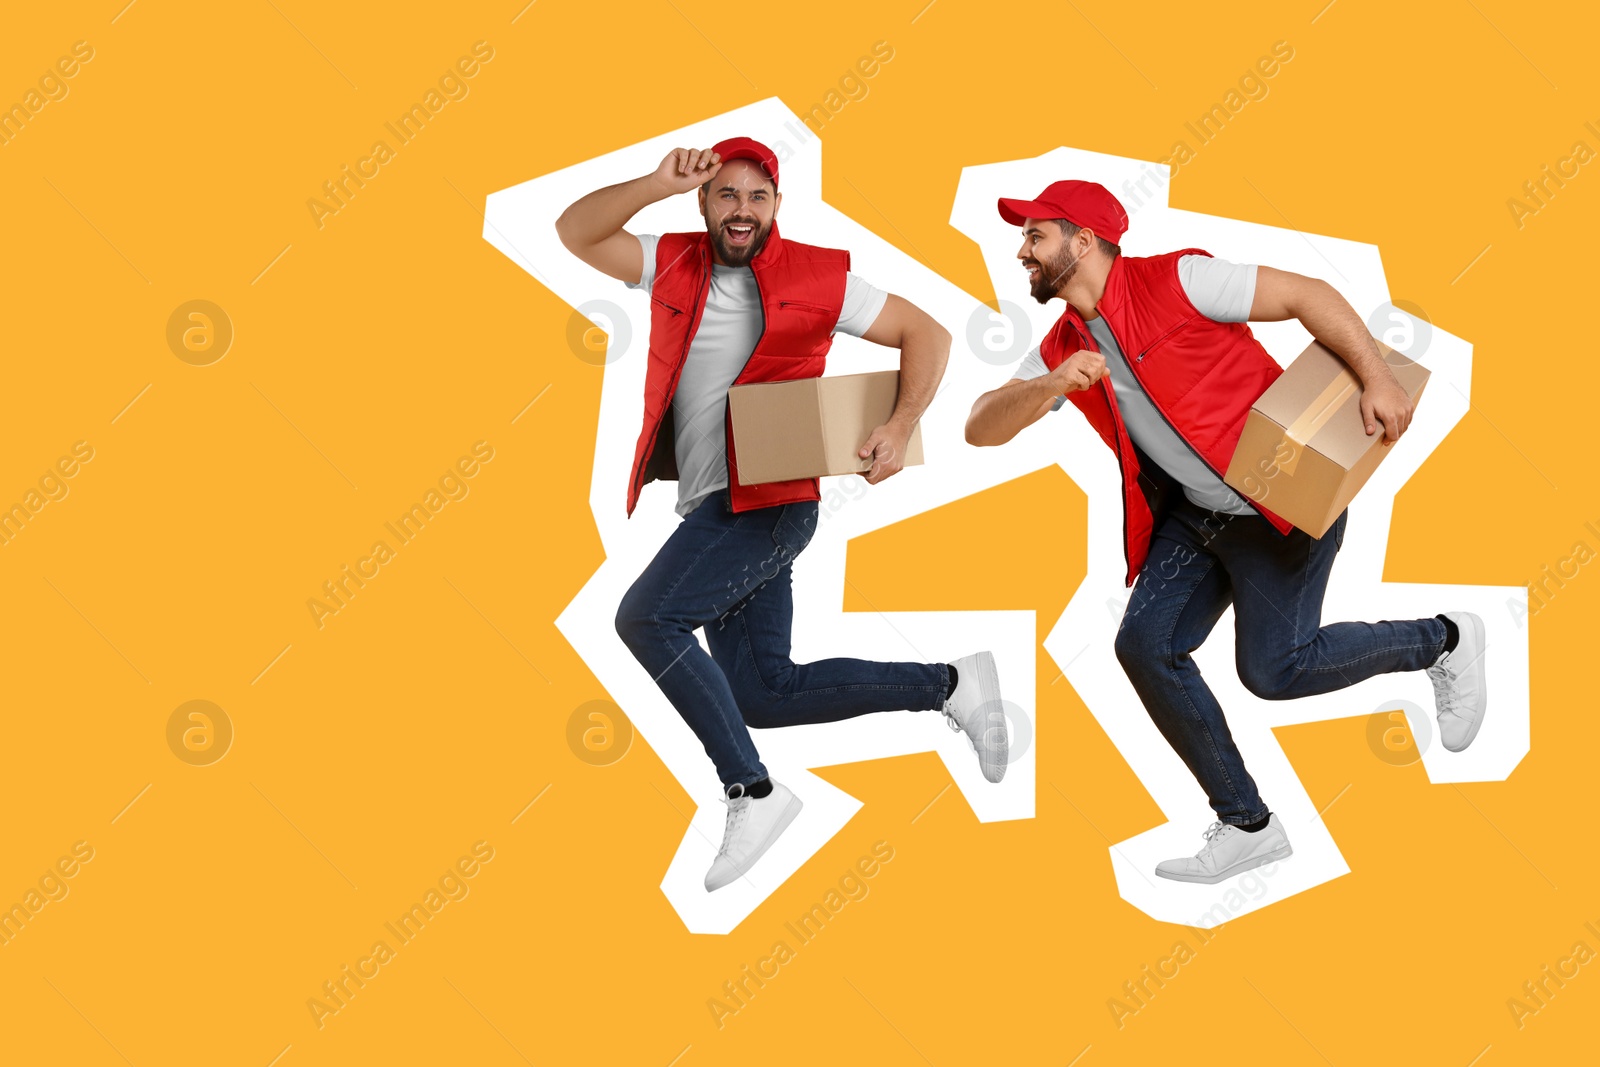 Image of Happy courier with parcels running on orange background, space for text. Creative collage